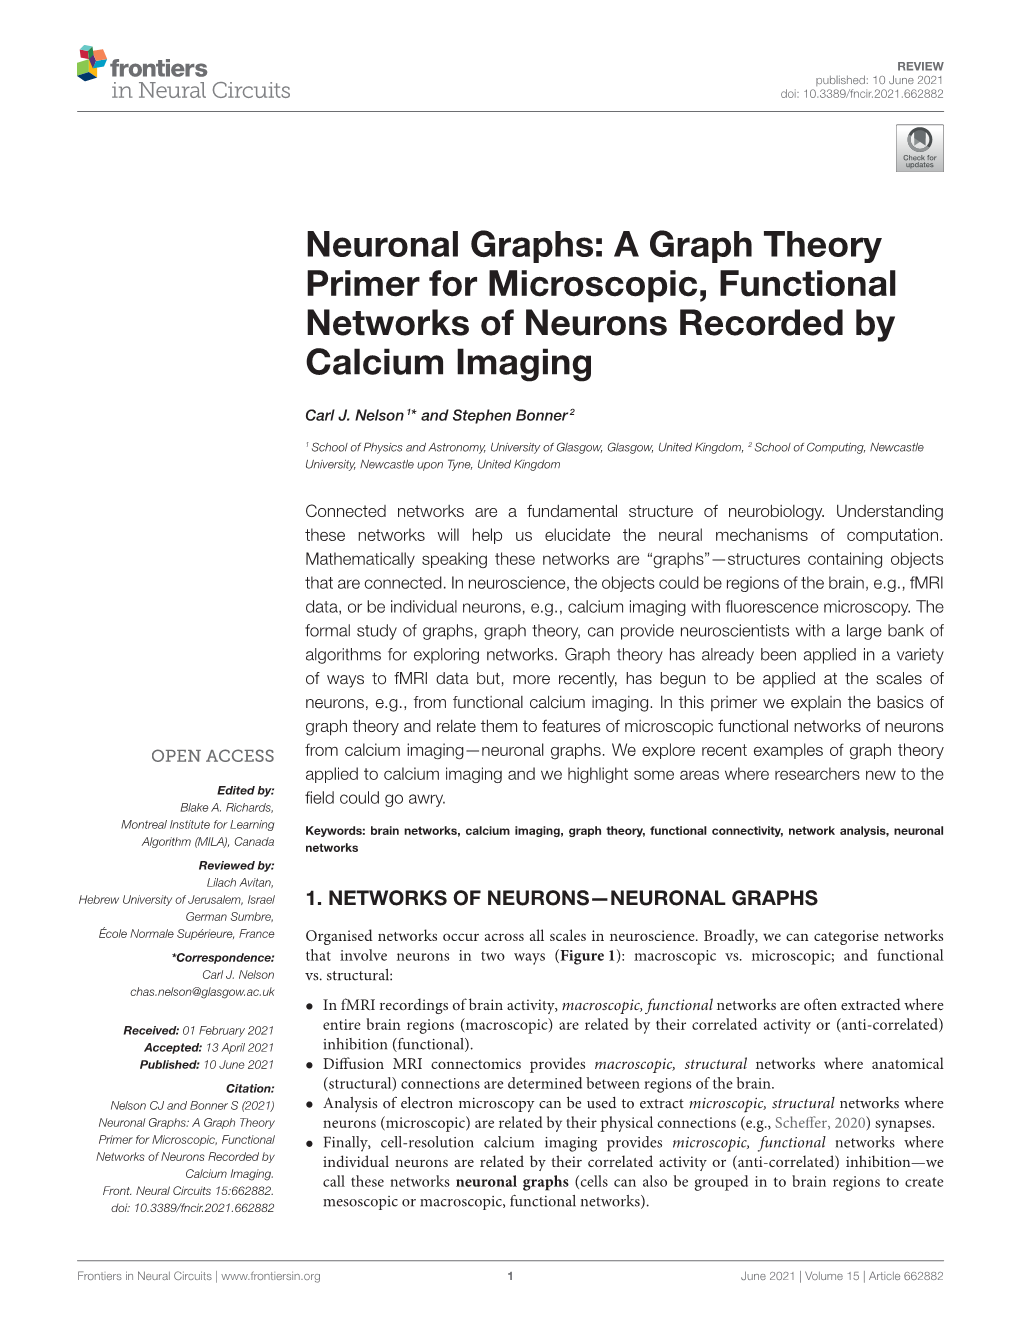 A Graph Theory Primer for Microscopic, Functional Networks of Neurons Recorded by Calcium Imaging